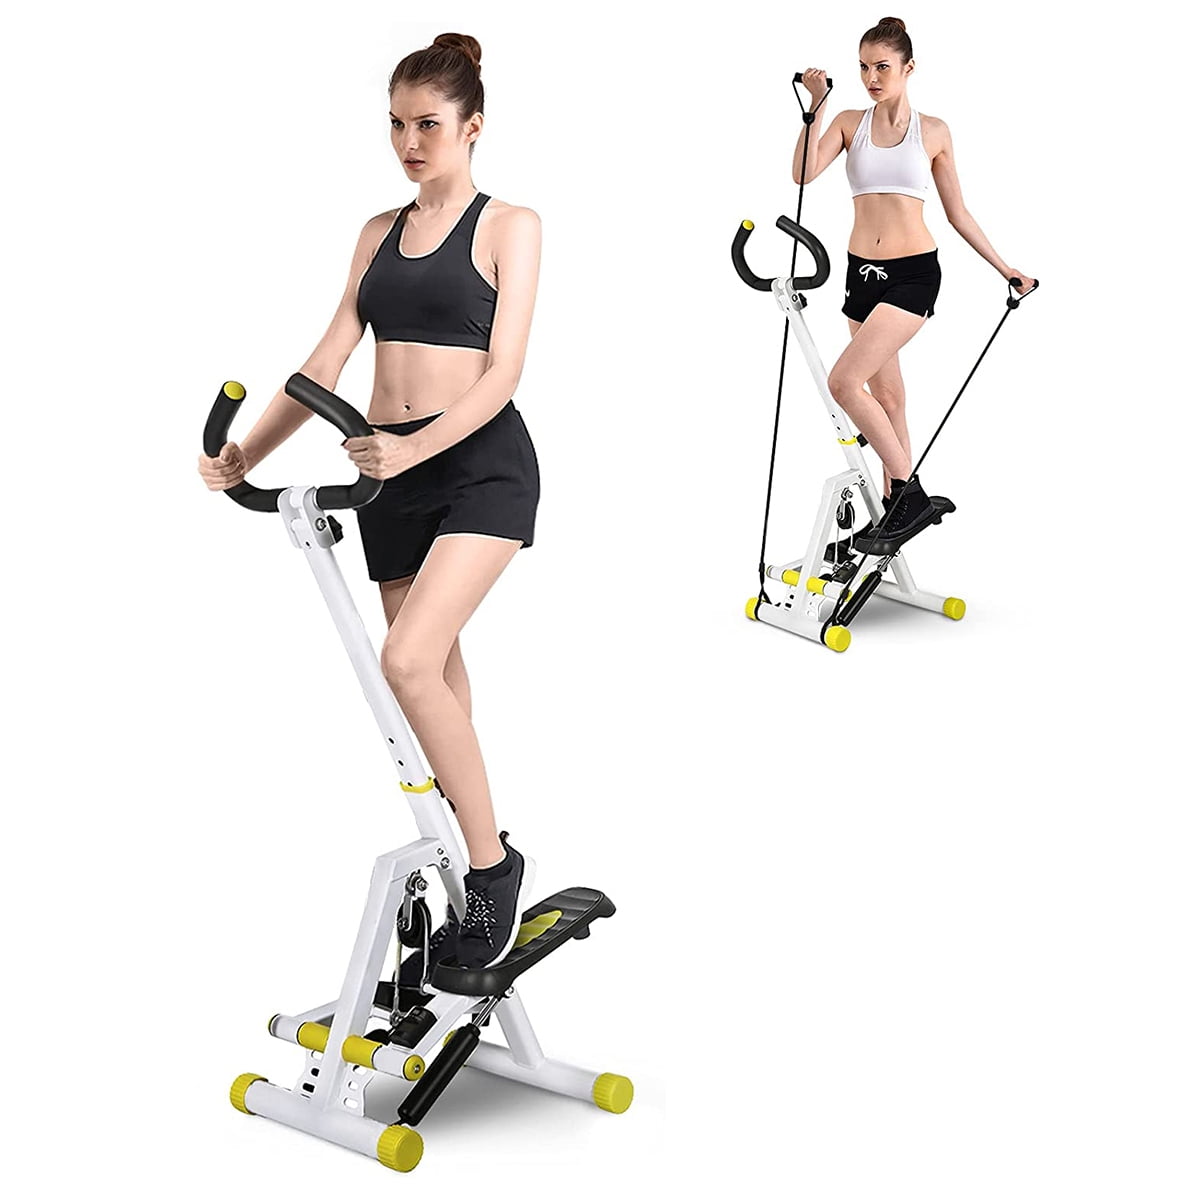 Fitness Workout Exercise Stair Stepper Machine Cardio Equipment W/ Handle Bar US 